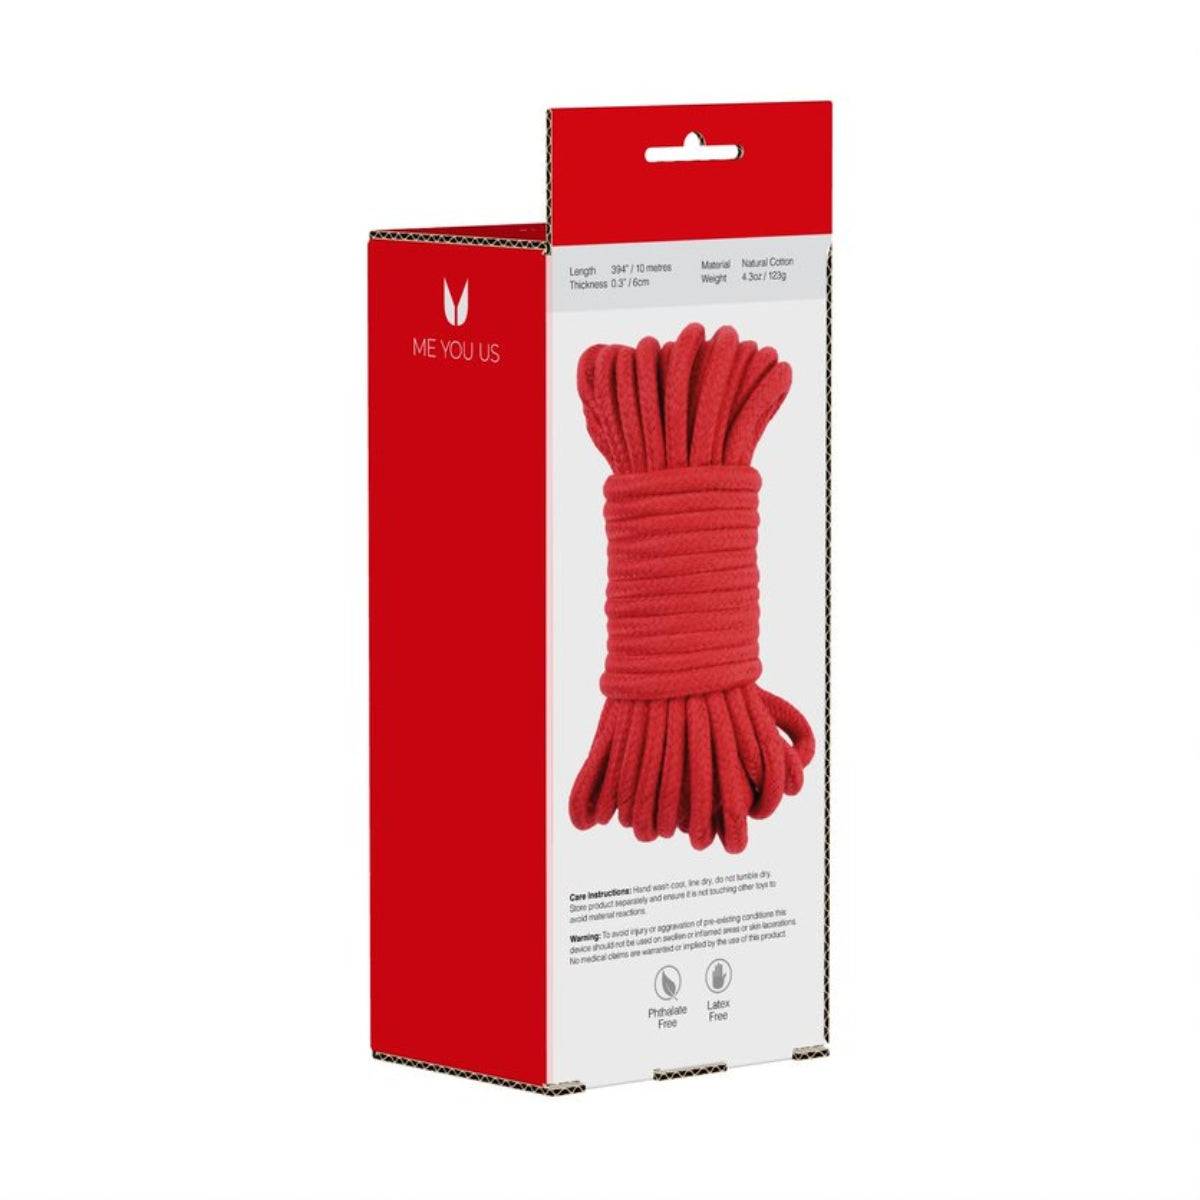 Rear Packaging View - Me You Us Tie Me Up Soft Cotton Rope Red 10m - Simply Pleasure